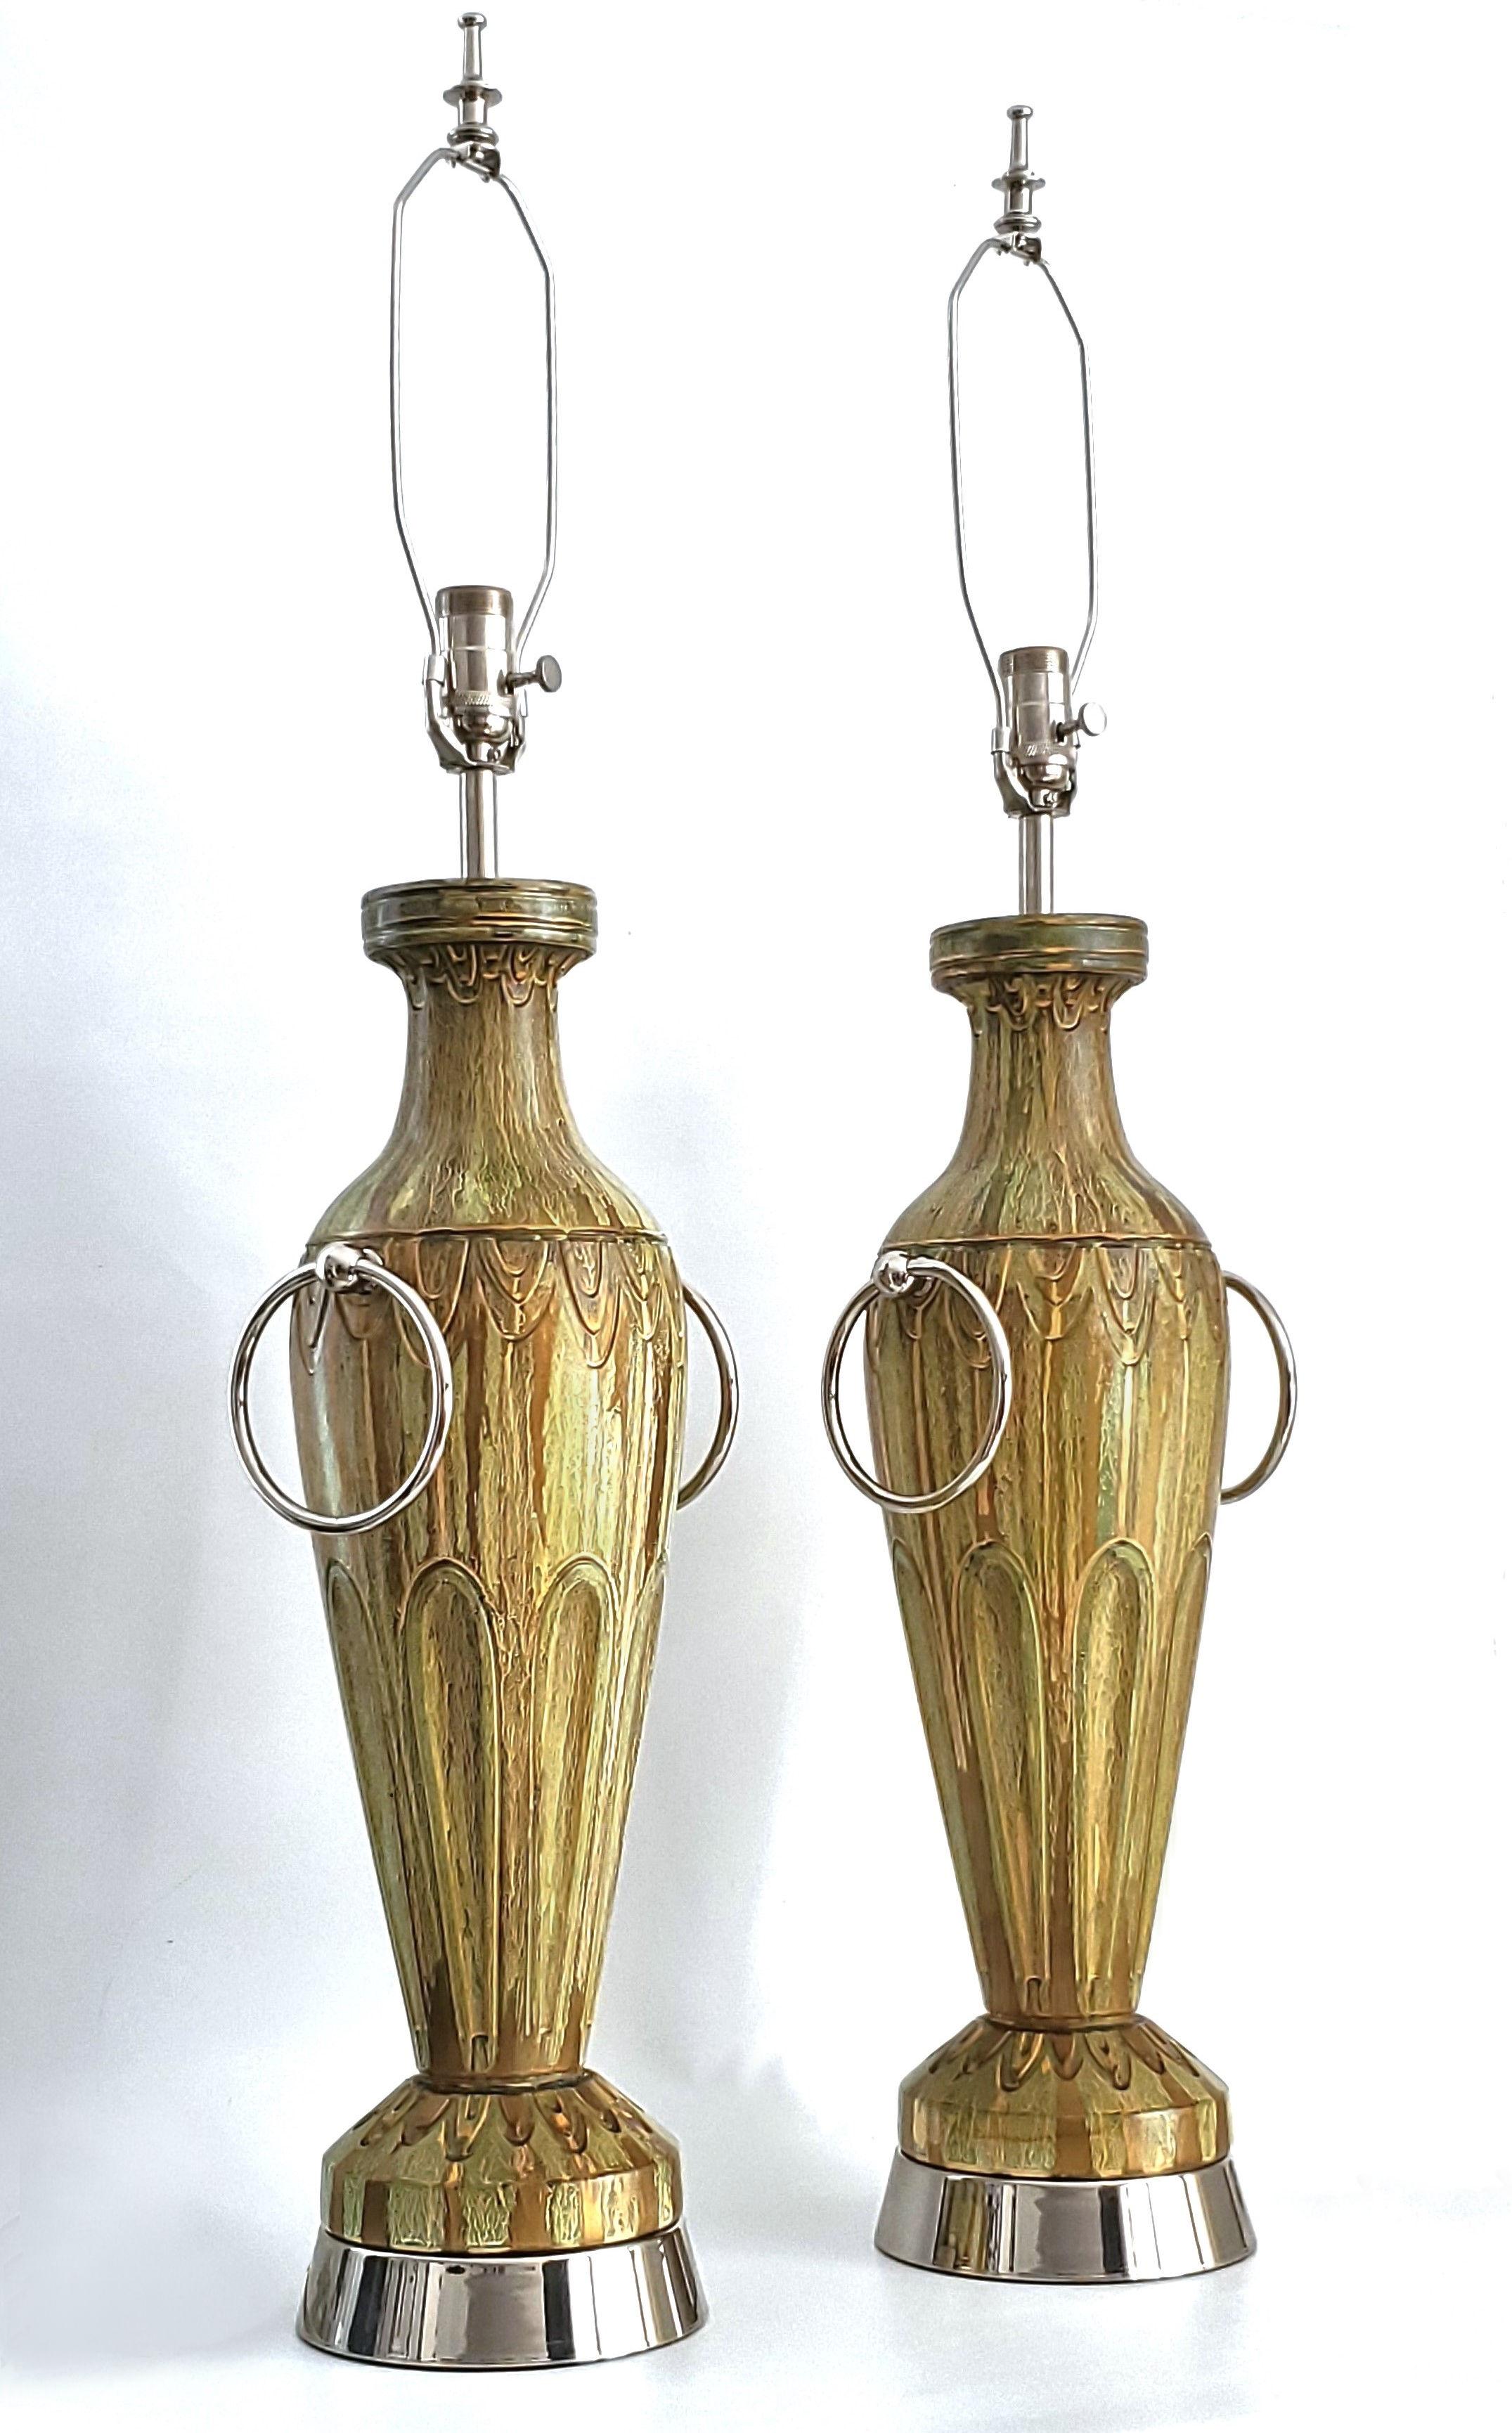 Pair of metallic gold and light green painted plaster table lamps with large nickel-plated rings, circa 1950. Both lamps are signed by the manufacturer on the back of the lamp. These lamps are authentic to the period and have been completely